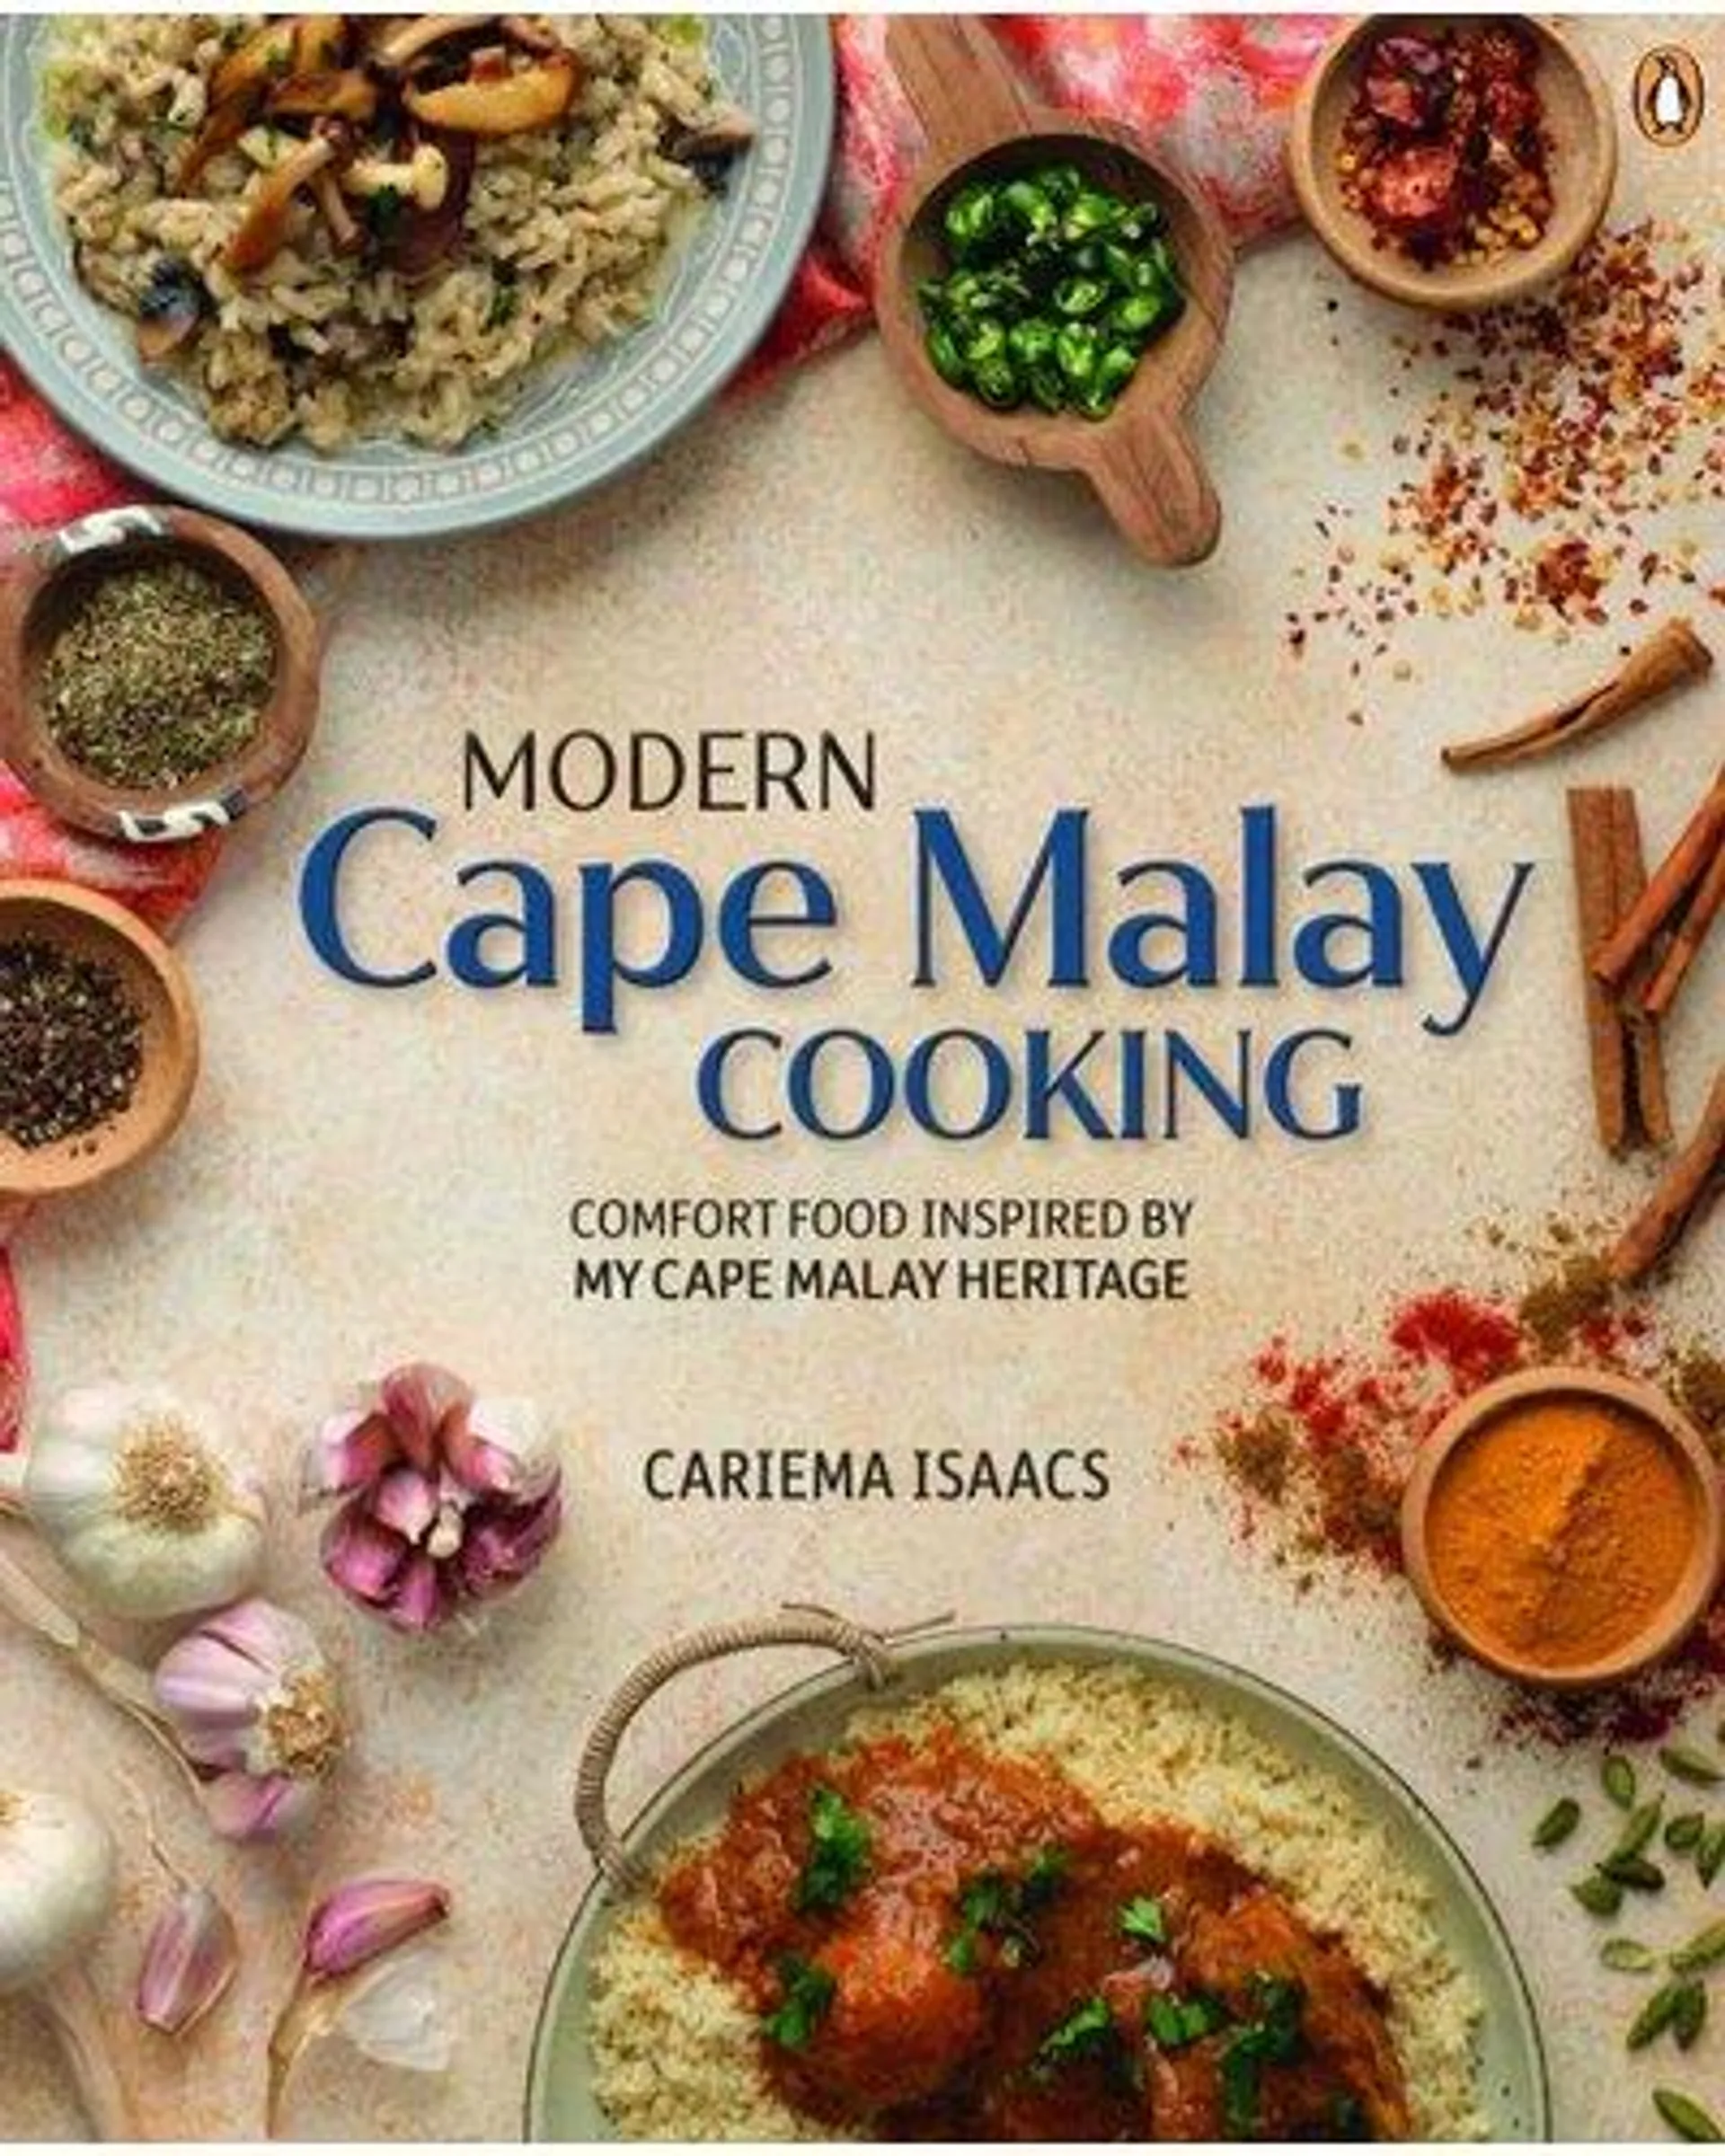 Modern Cape Malay Cooking - Comfort Food Inspired By My Cape Malay Heritage (Paperback)